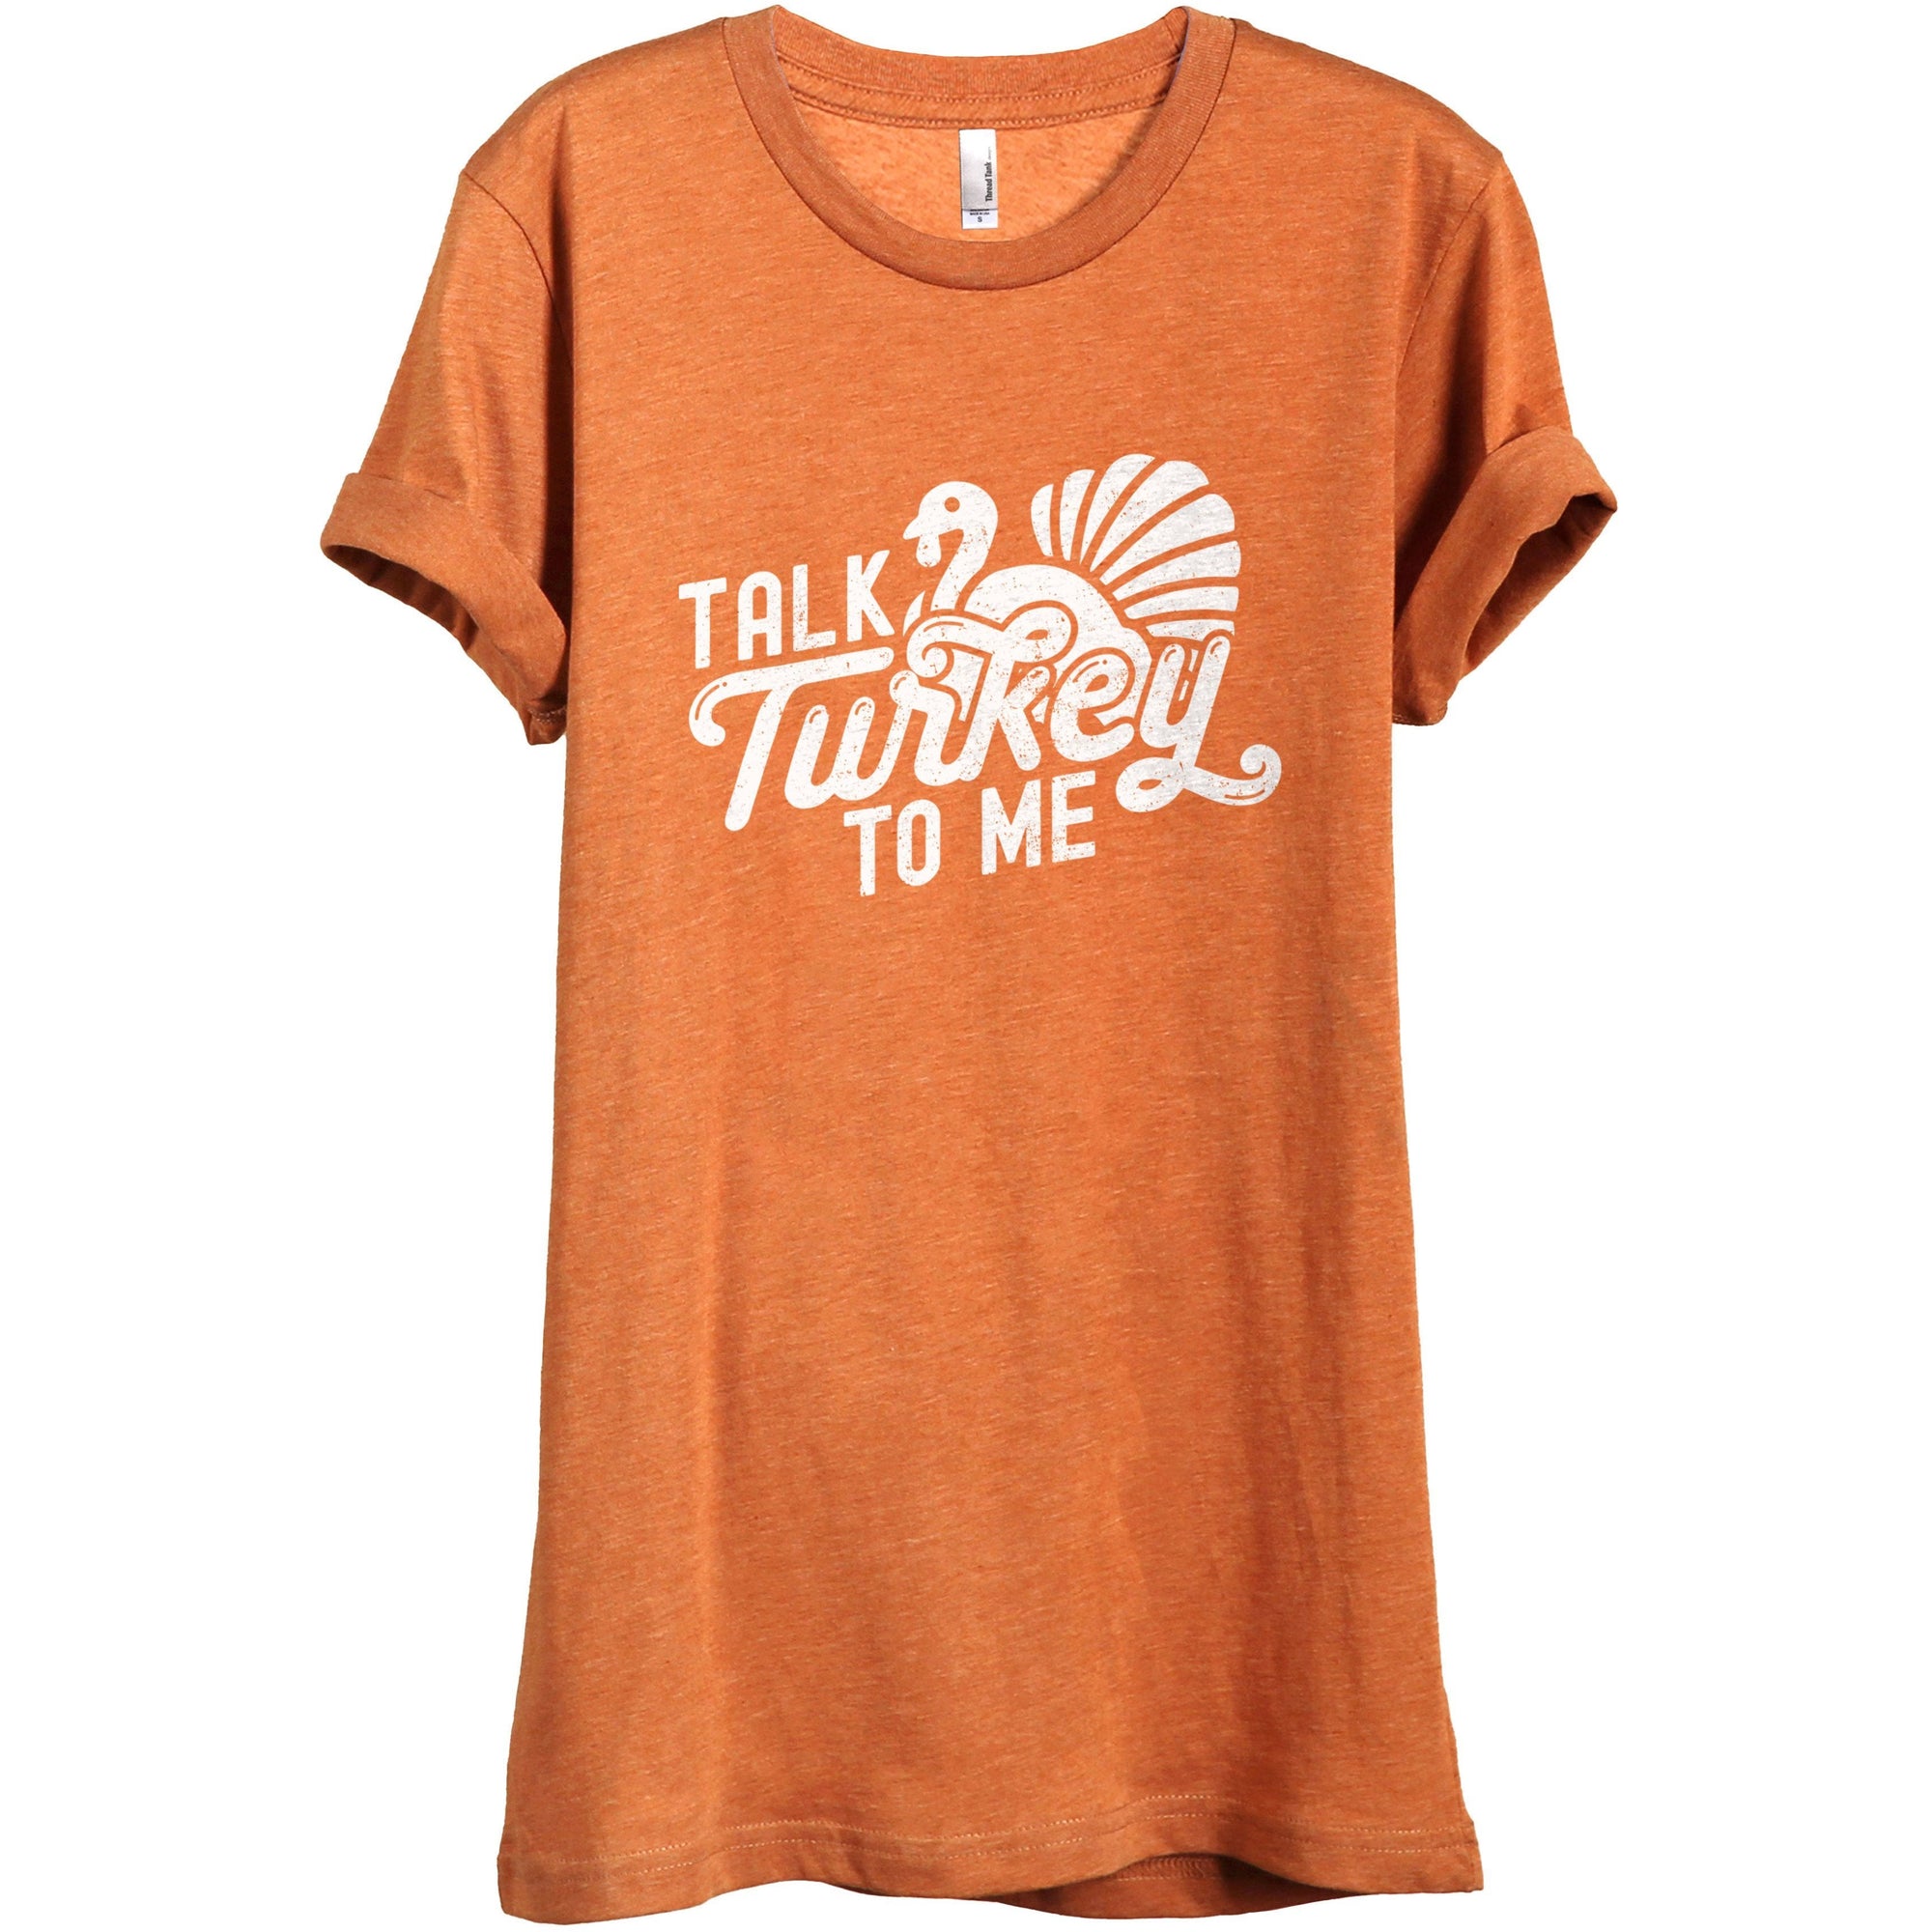 Talk Turkey To Me - thread tank | Stories you can wear.